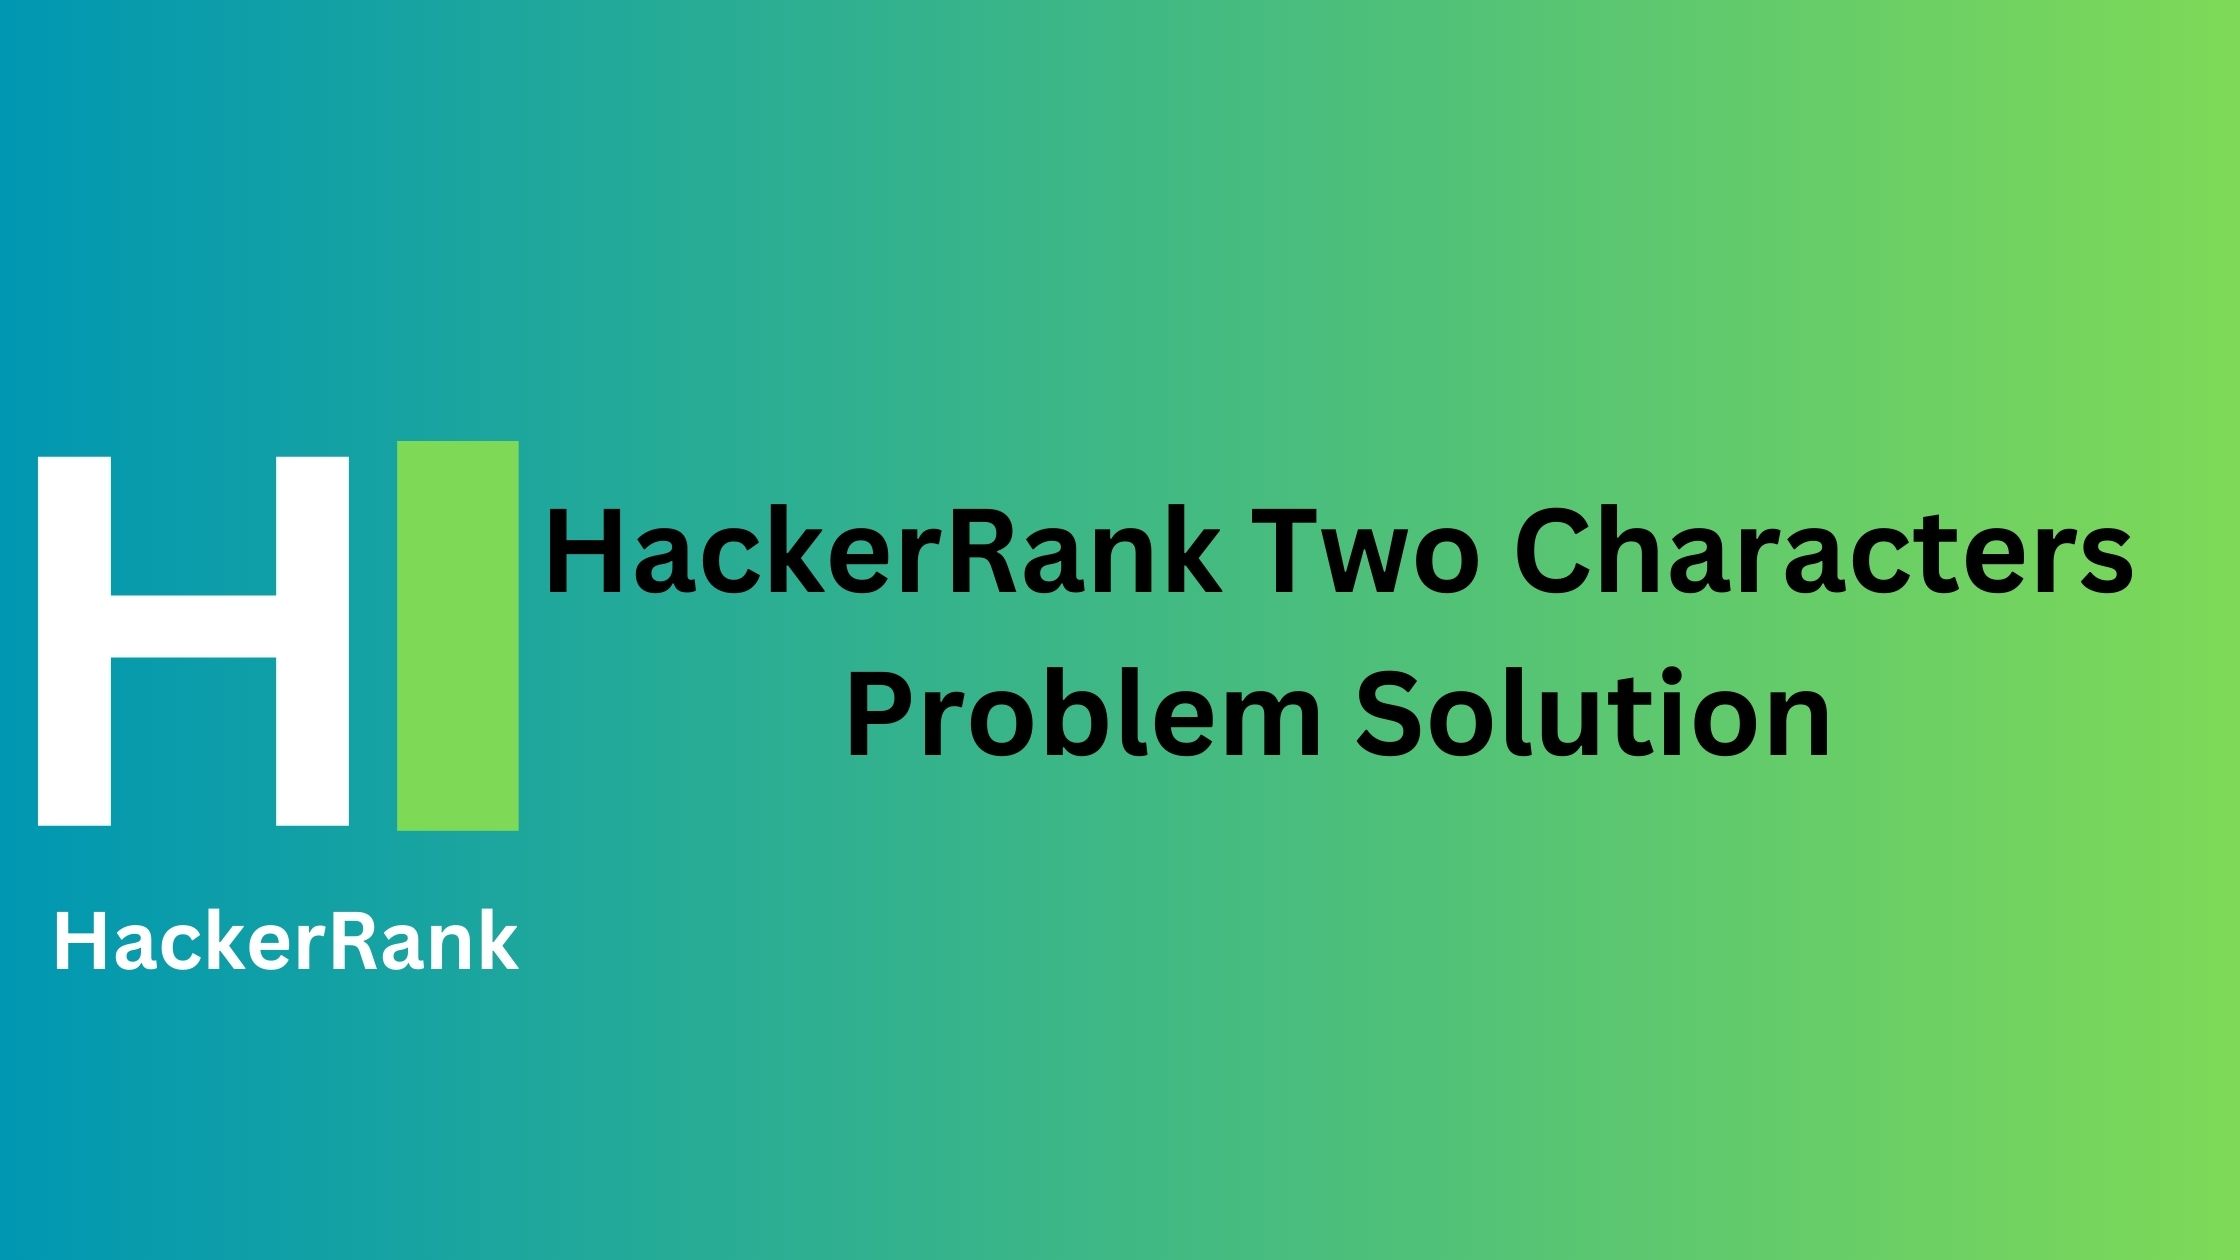 HackerRank Two Characters Problem Solution